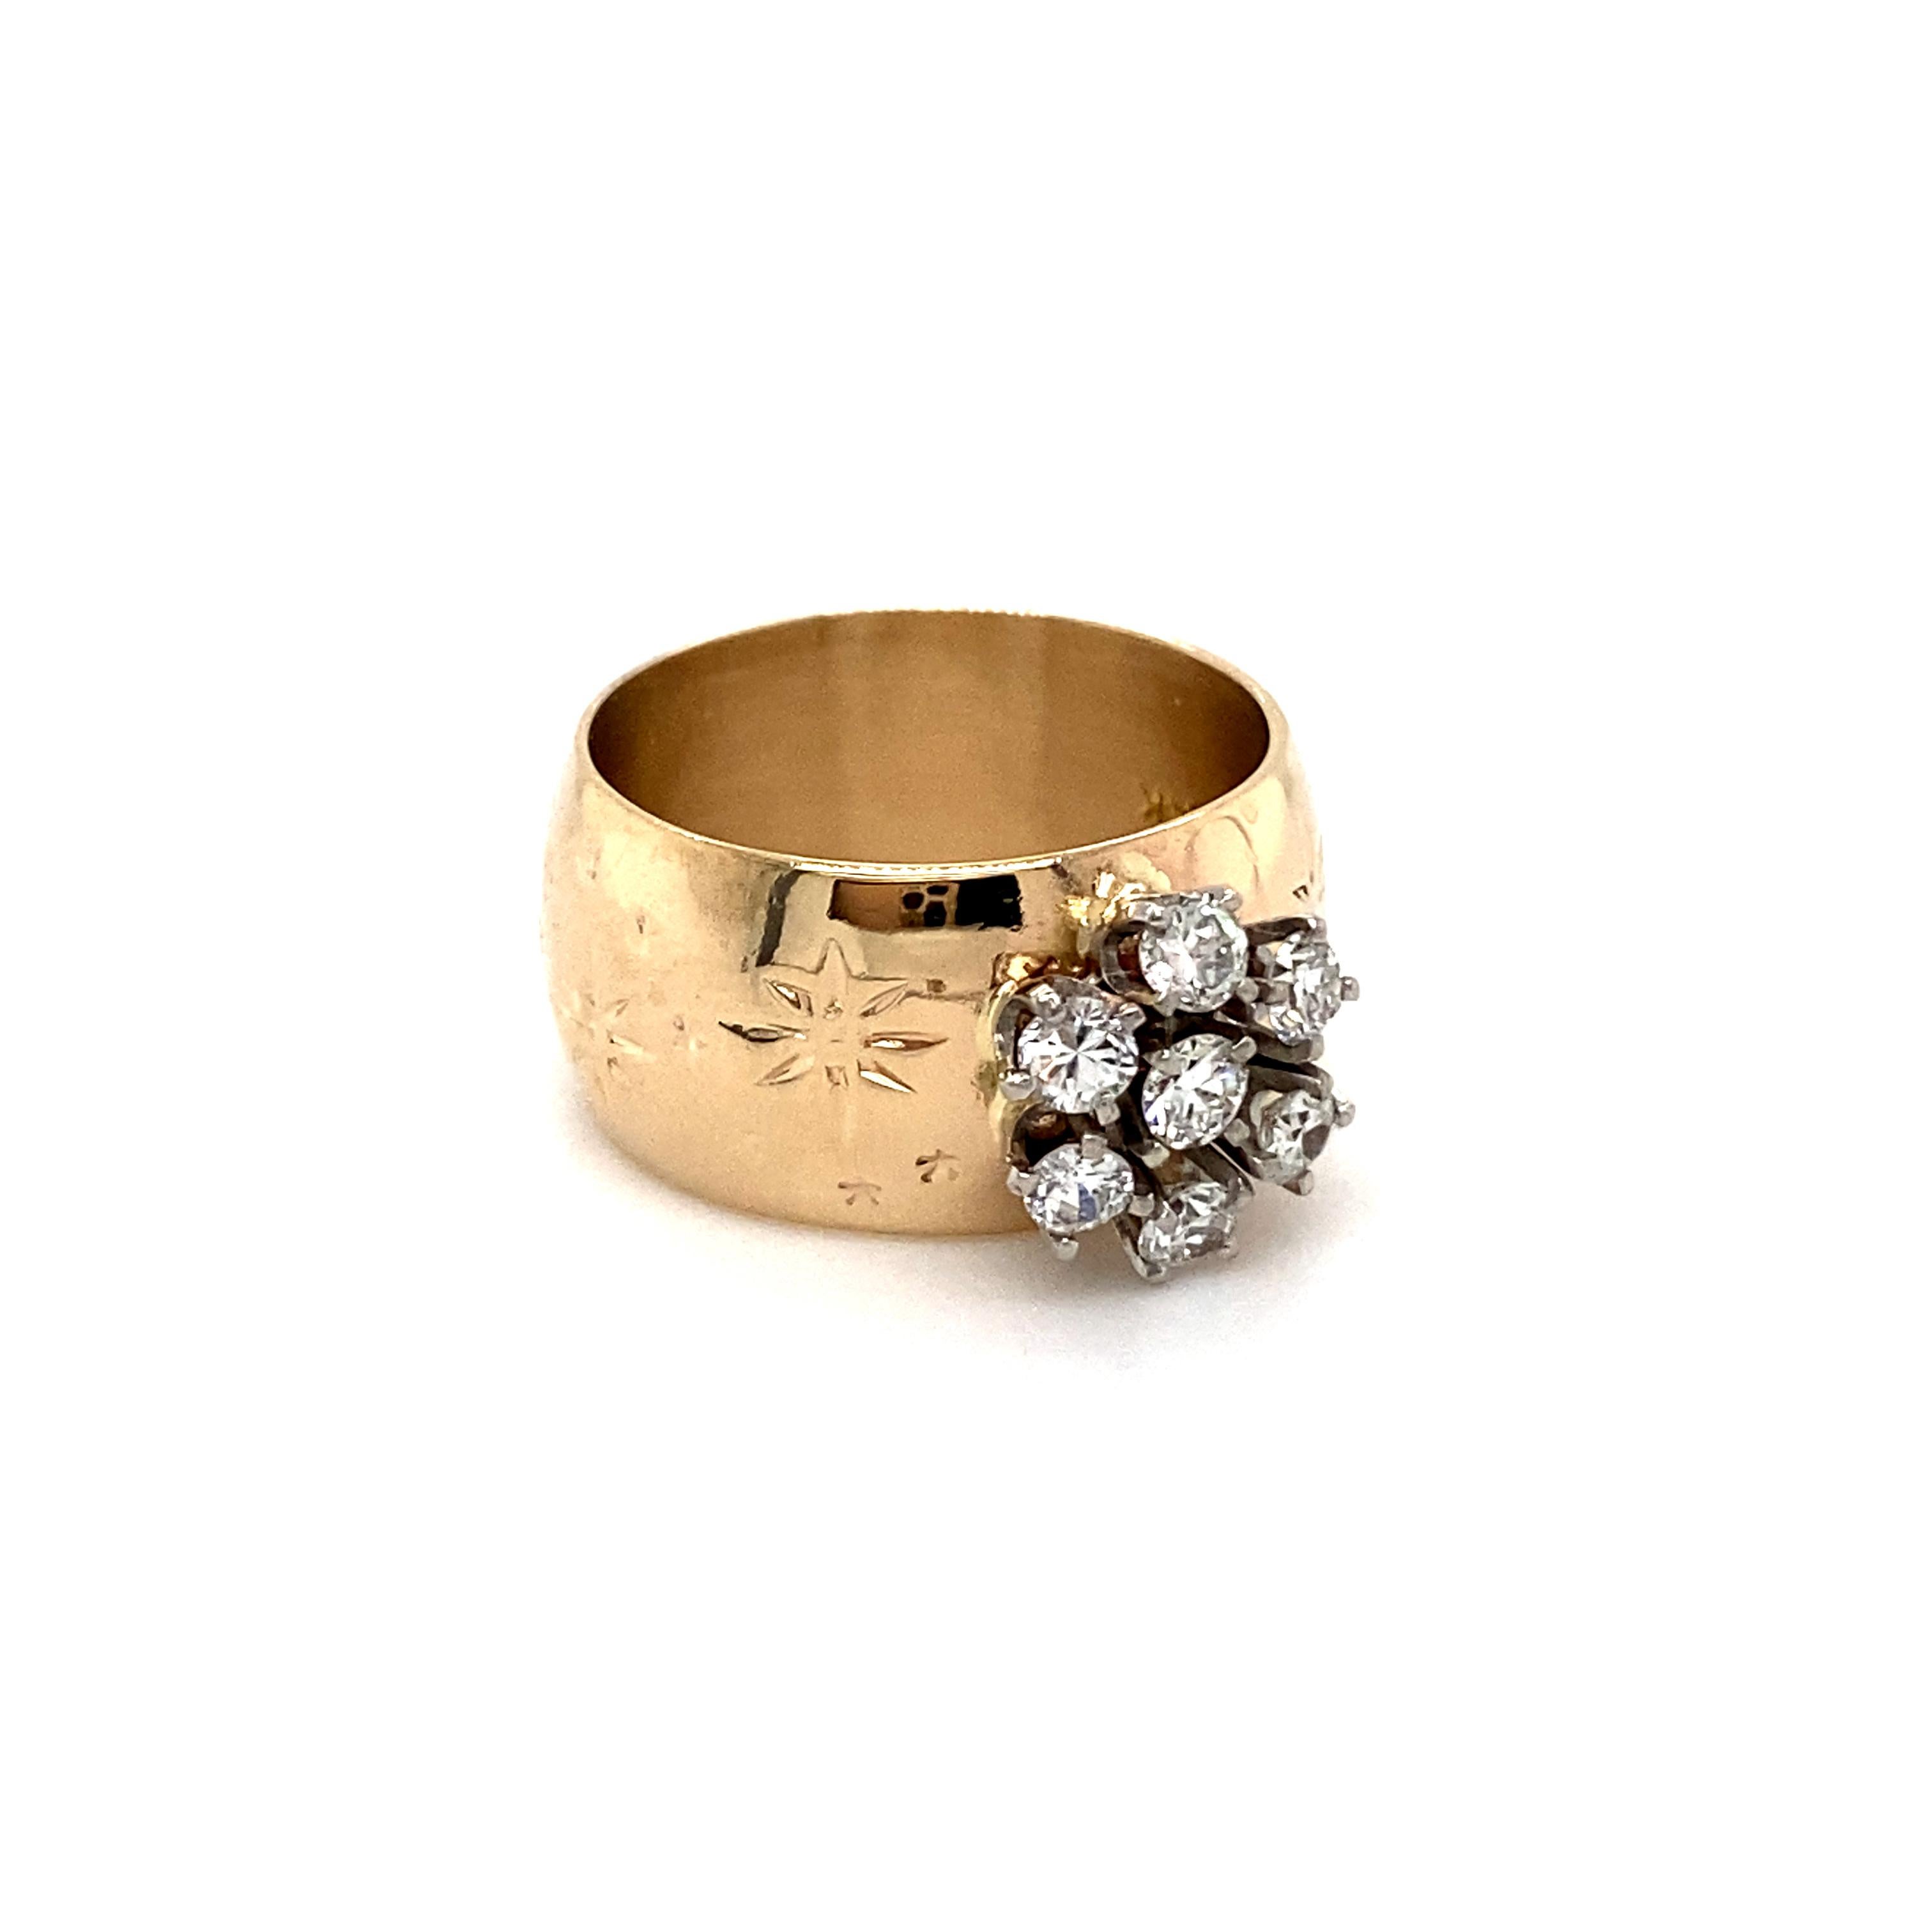 This Wonderful Star Motif Wide Vintage Diamond Ring is uniquely beautiful. Crafted in 14K Yellow Gold, the band features a thick, wide band with an imprinted star motif in eternity, set with a lovely cluster of diamonds. In the center, the ring